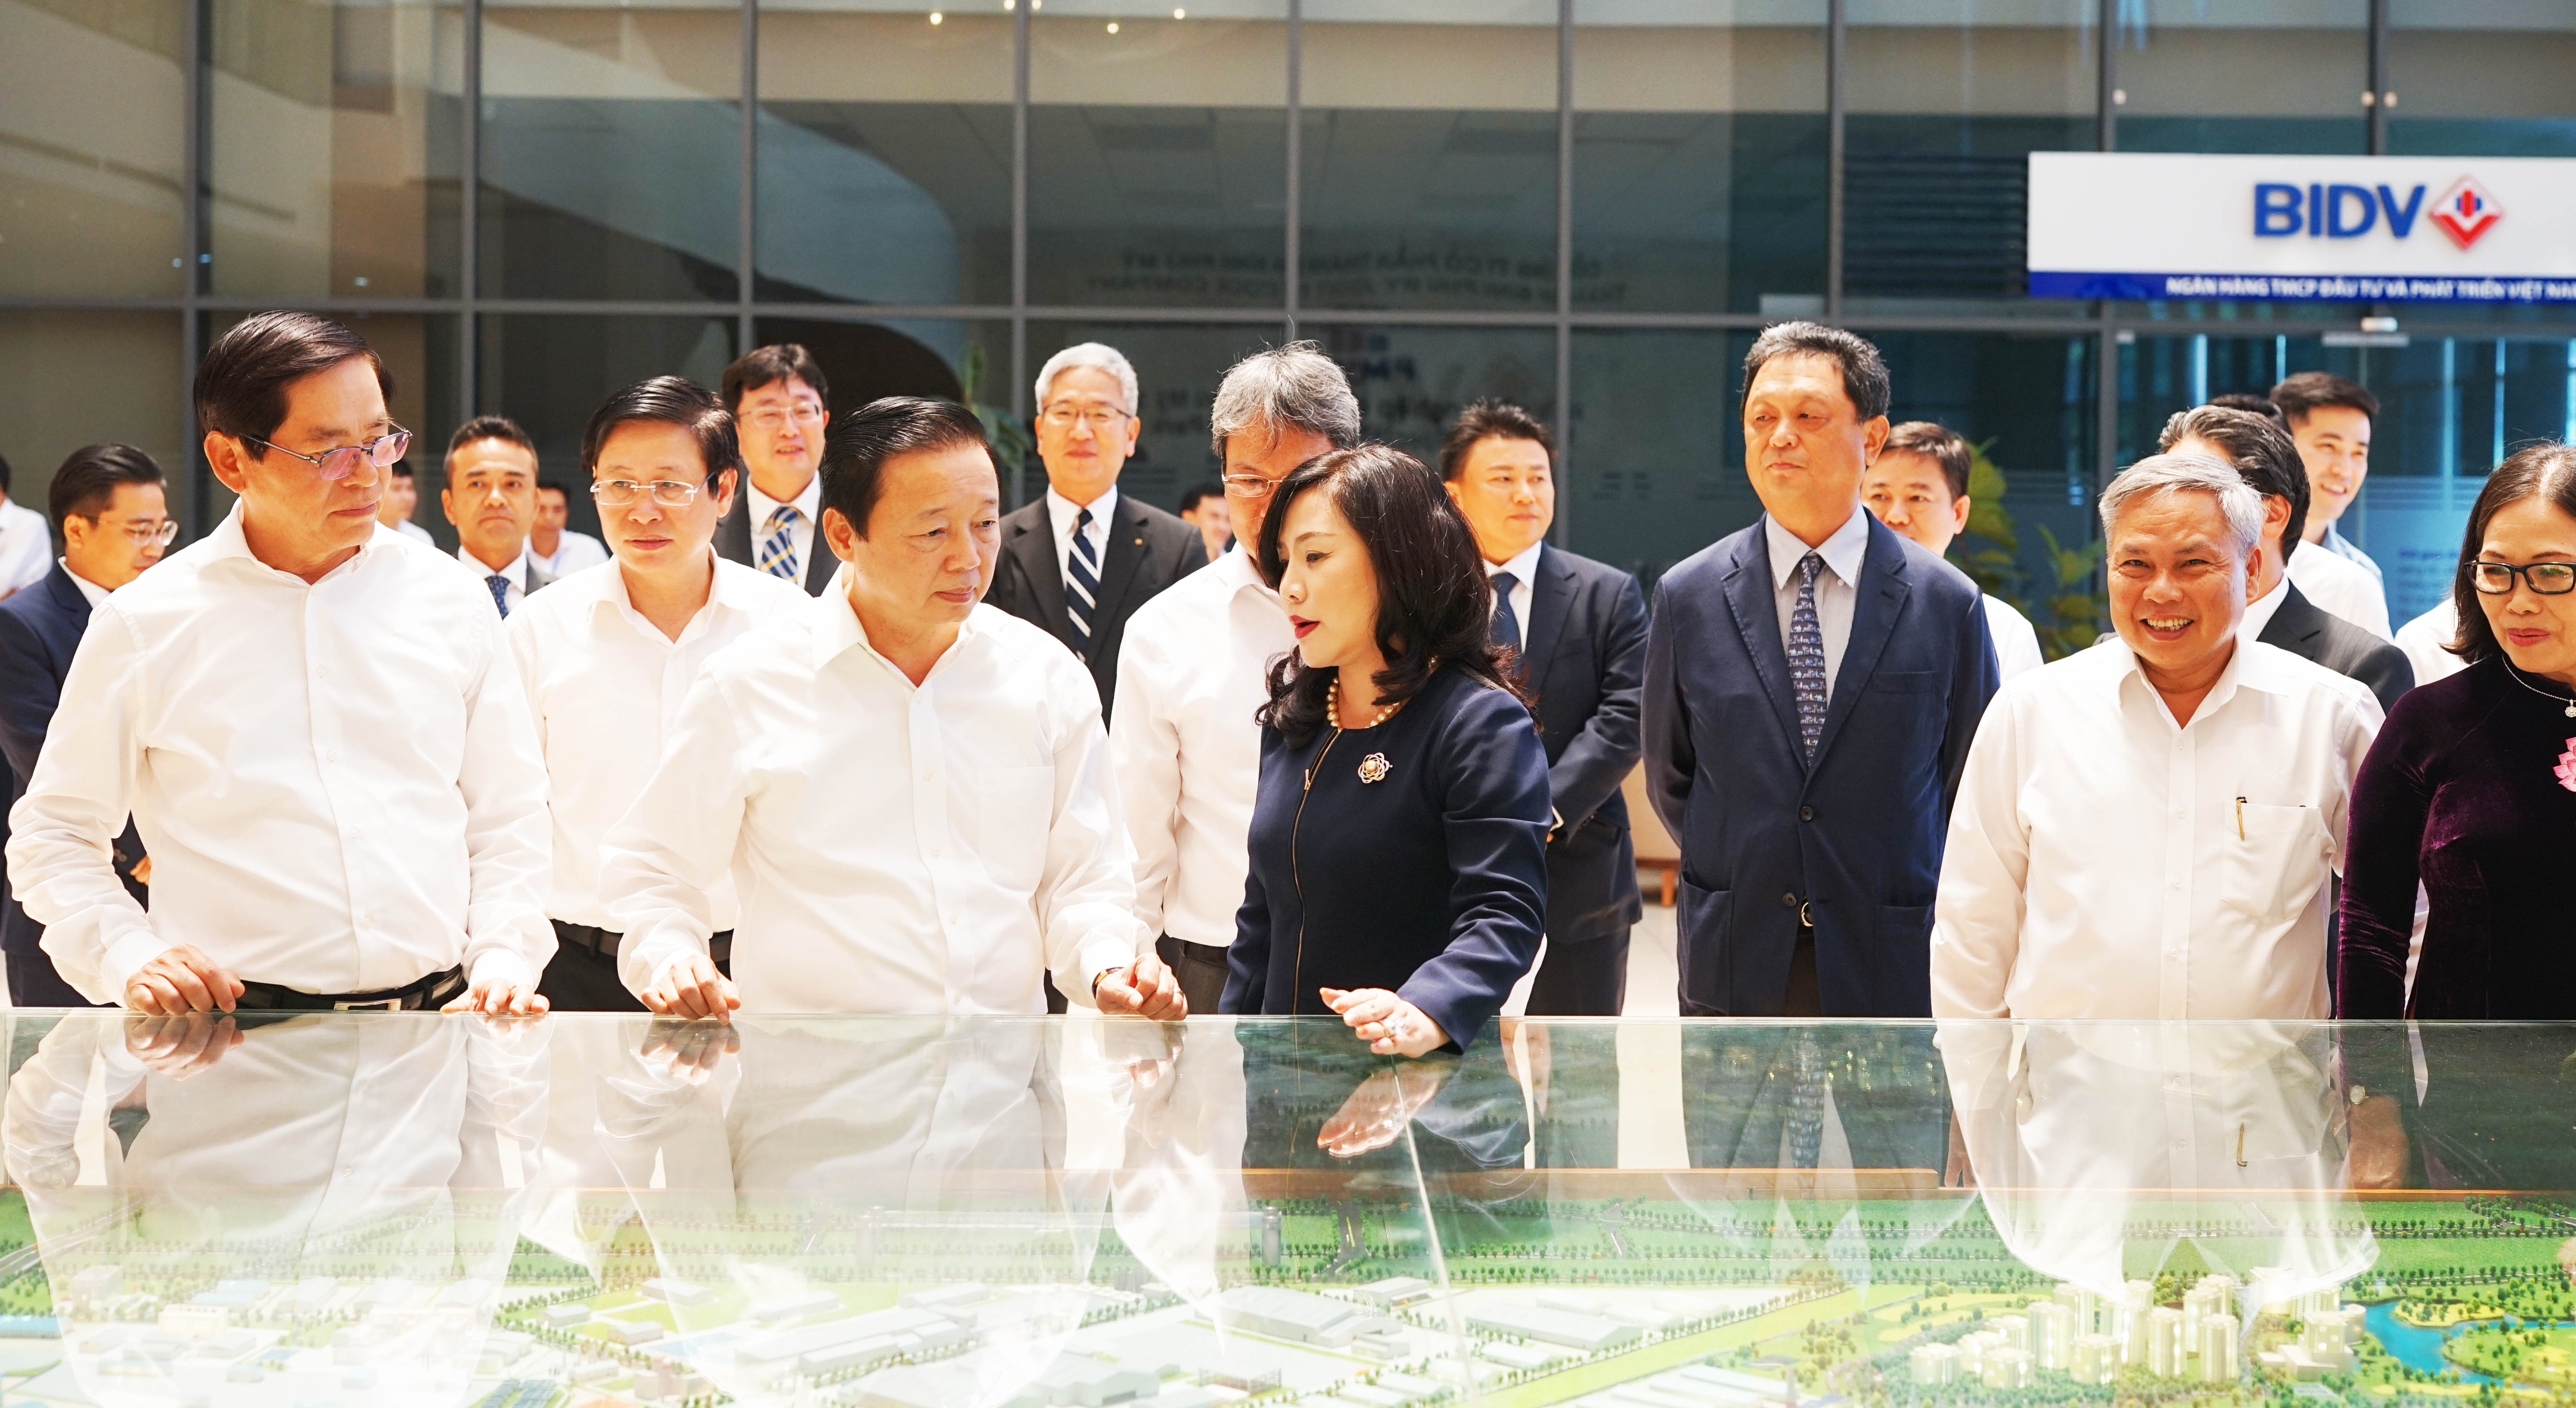 MR. TRAN HONG HA - DEPUTY PRIME MINISTER VISITED PHU MY 3 SPECIALIZED INDUSTRIAL PARK